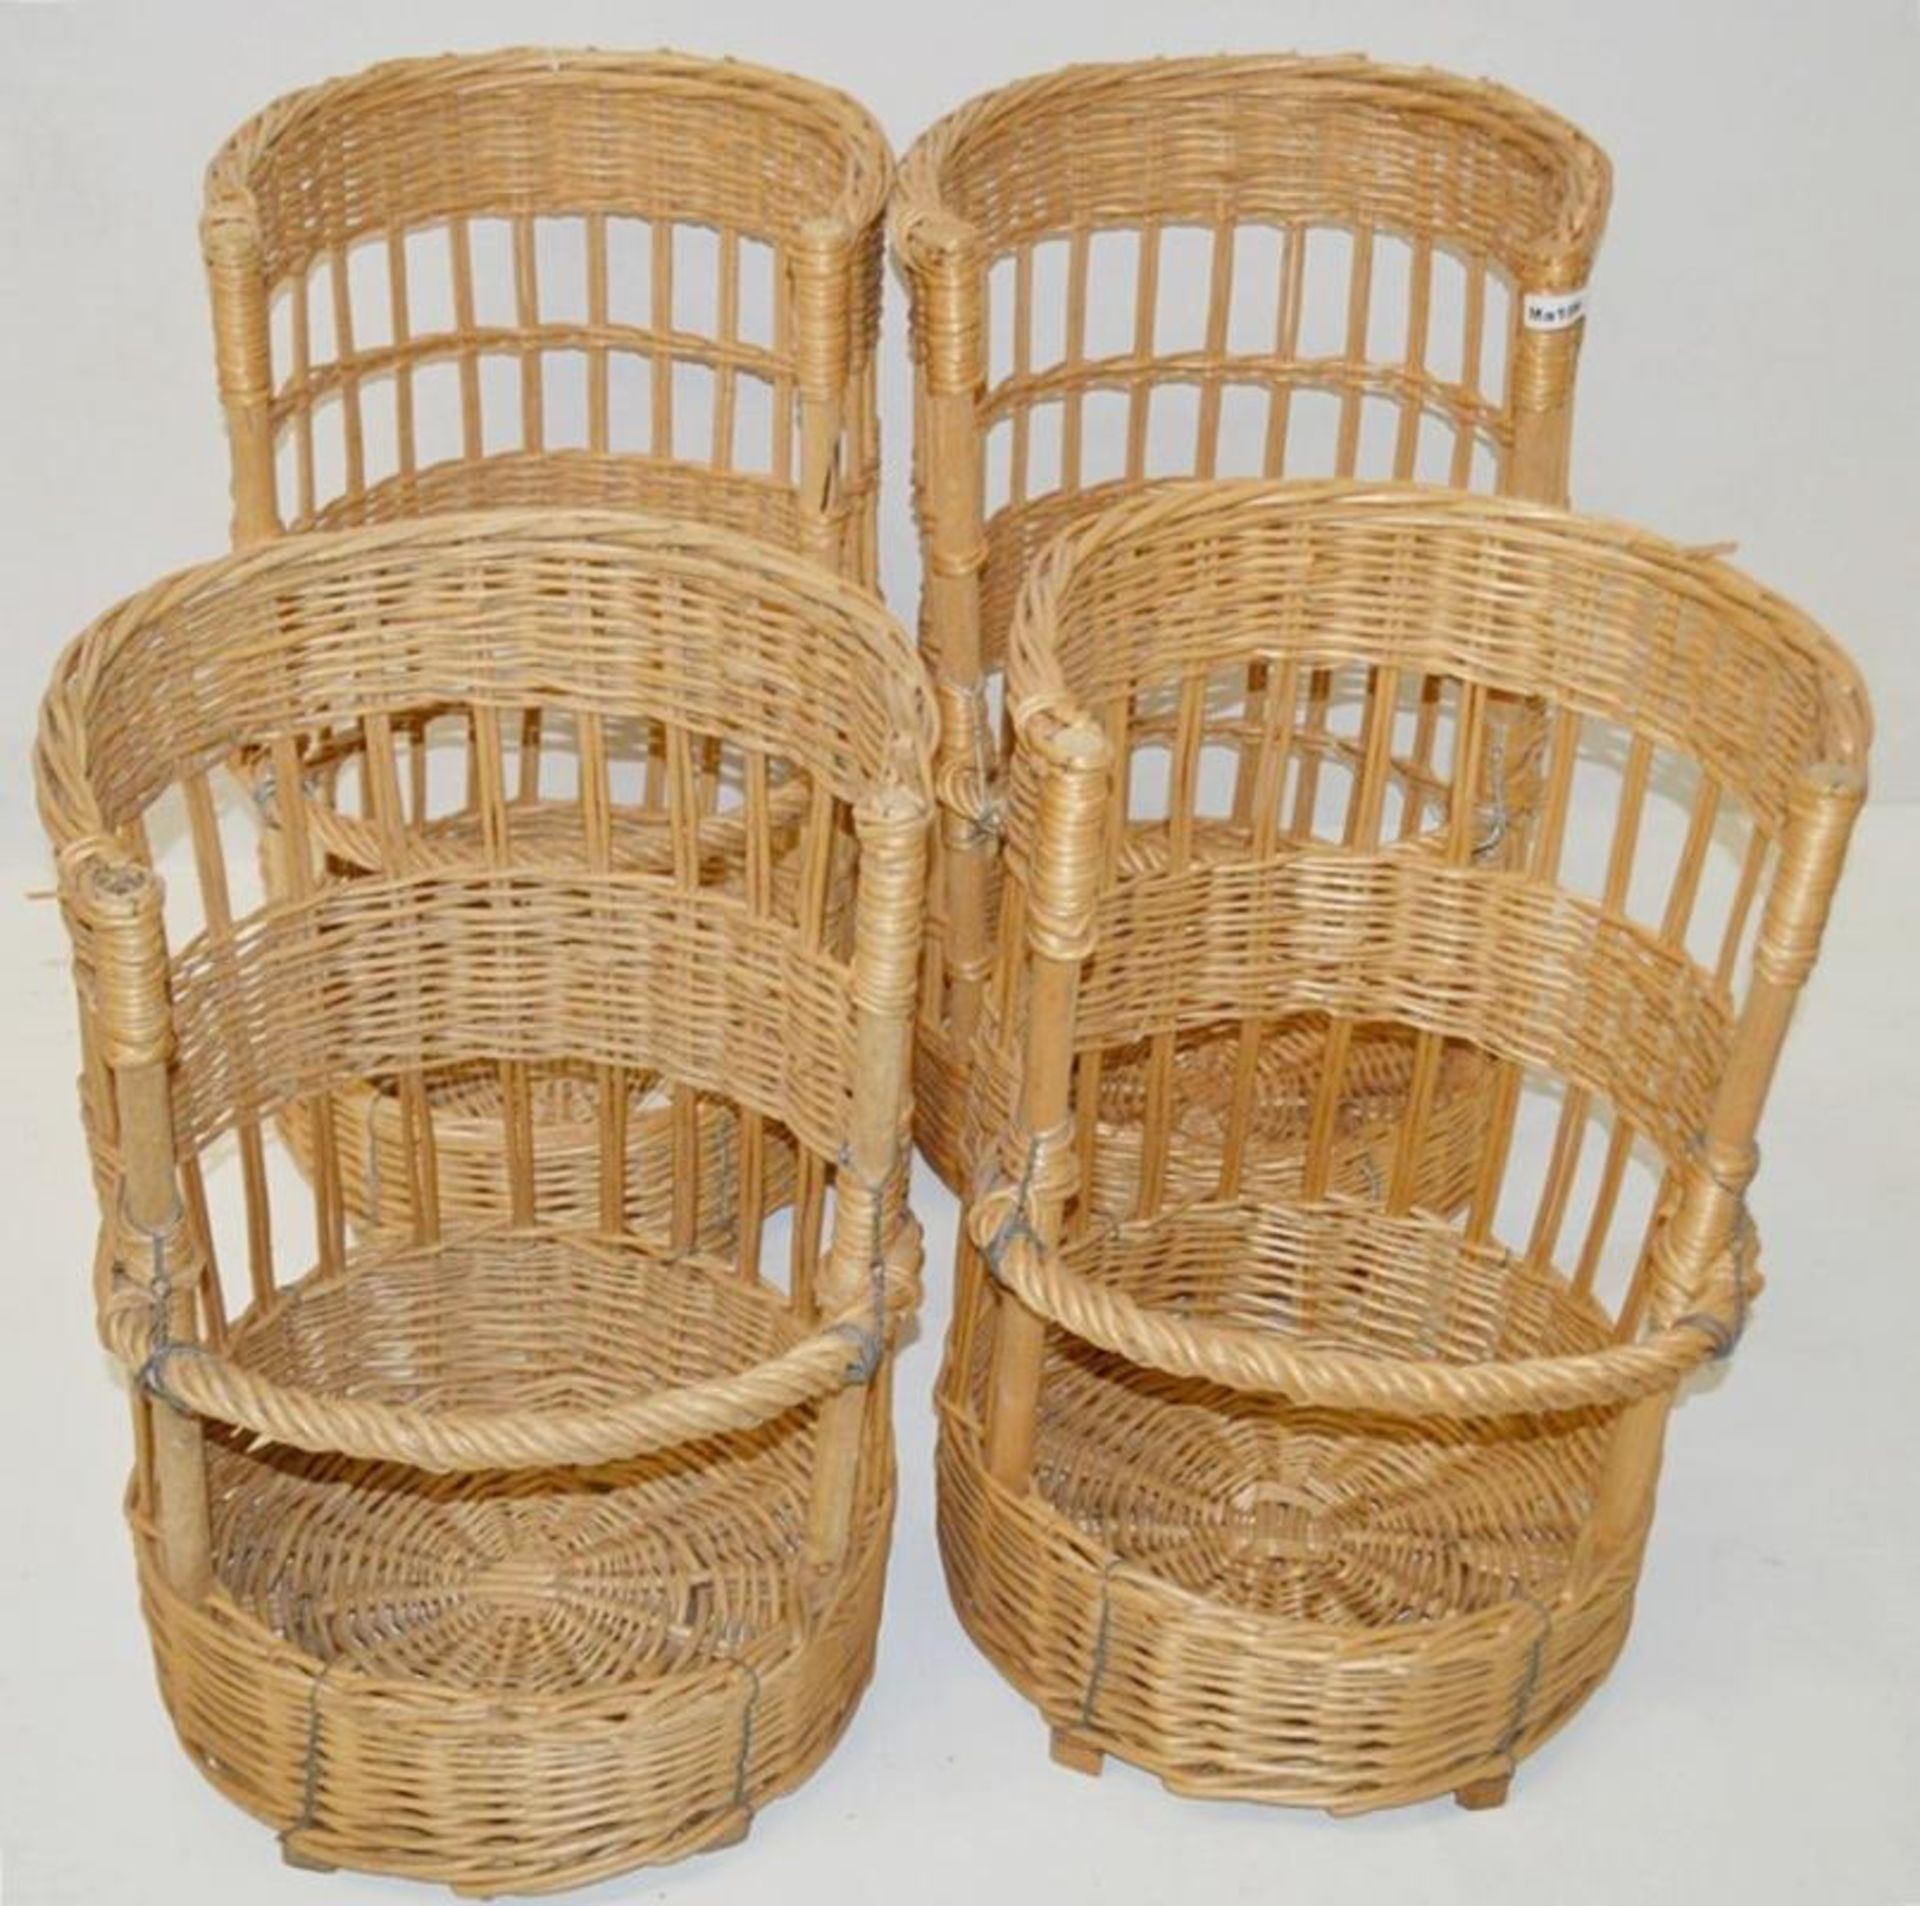 5 x Traditional French Bread Bagette Wicker Baskets - Dimensions: Diameter 45cm / Height 63cm - New